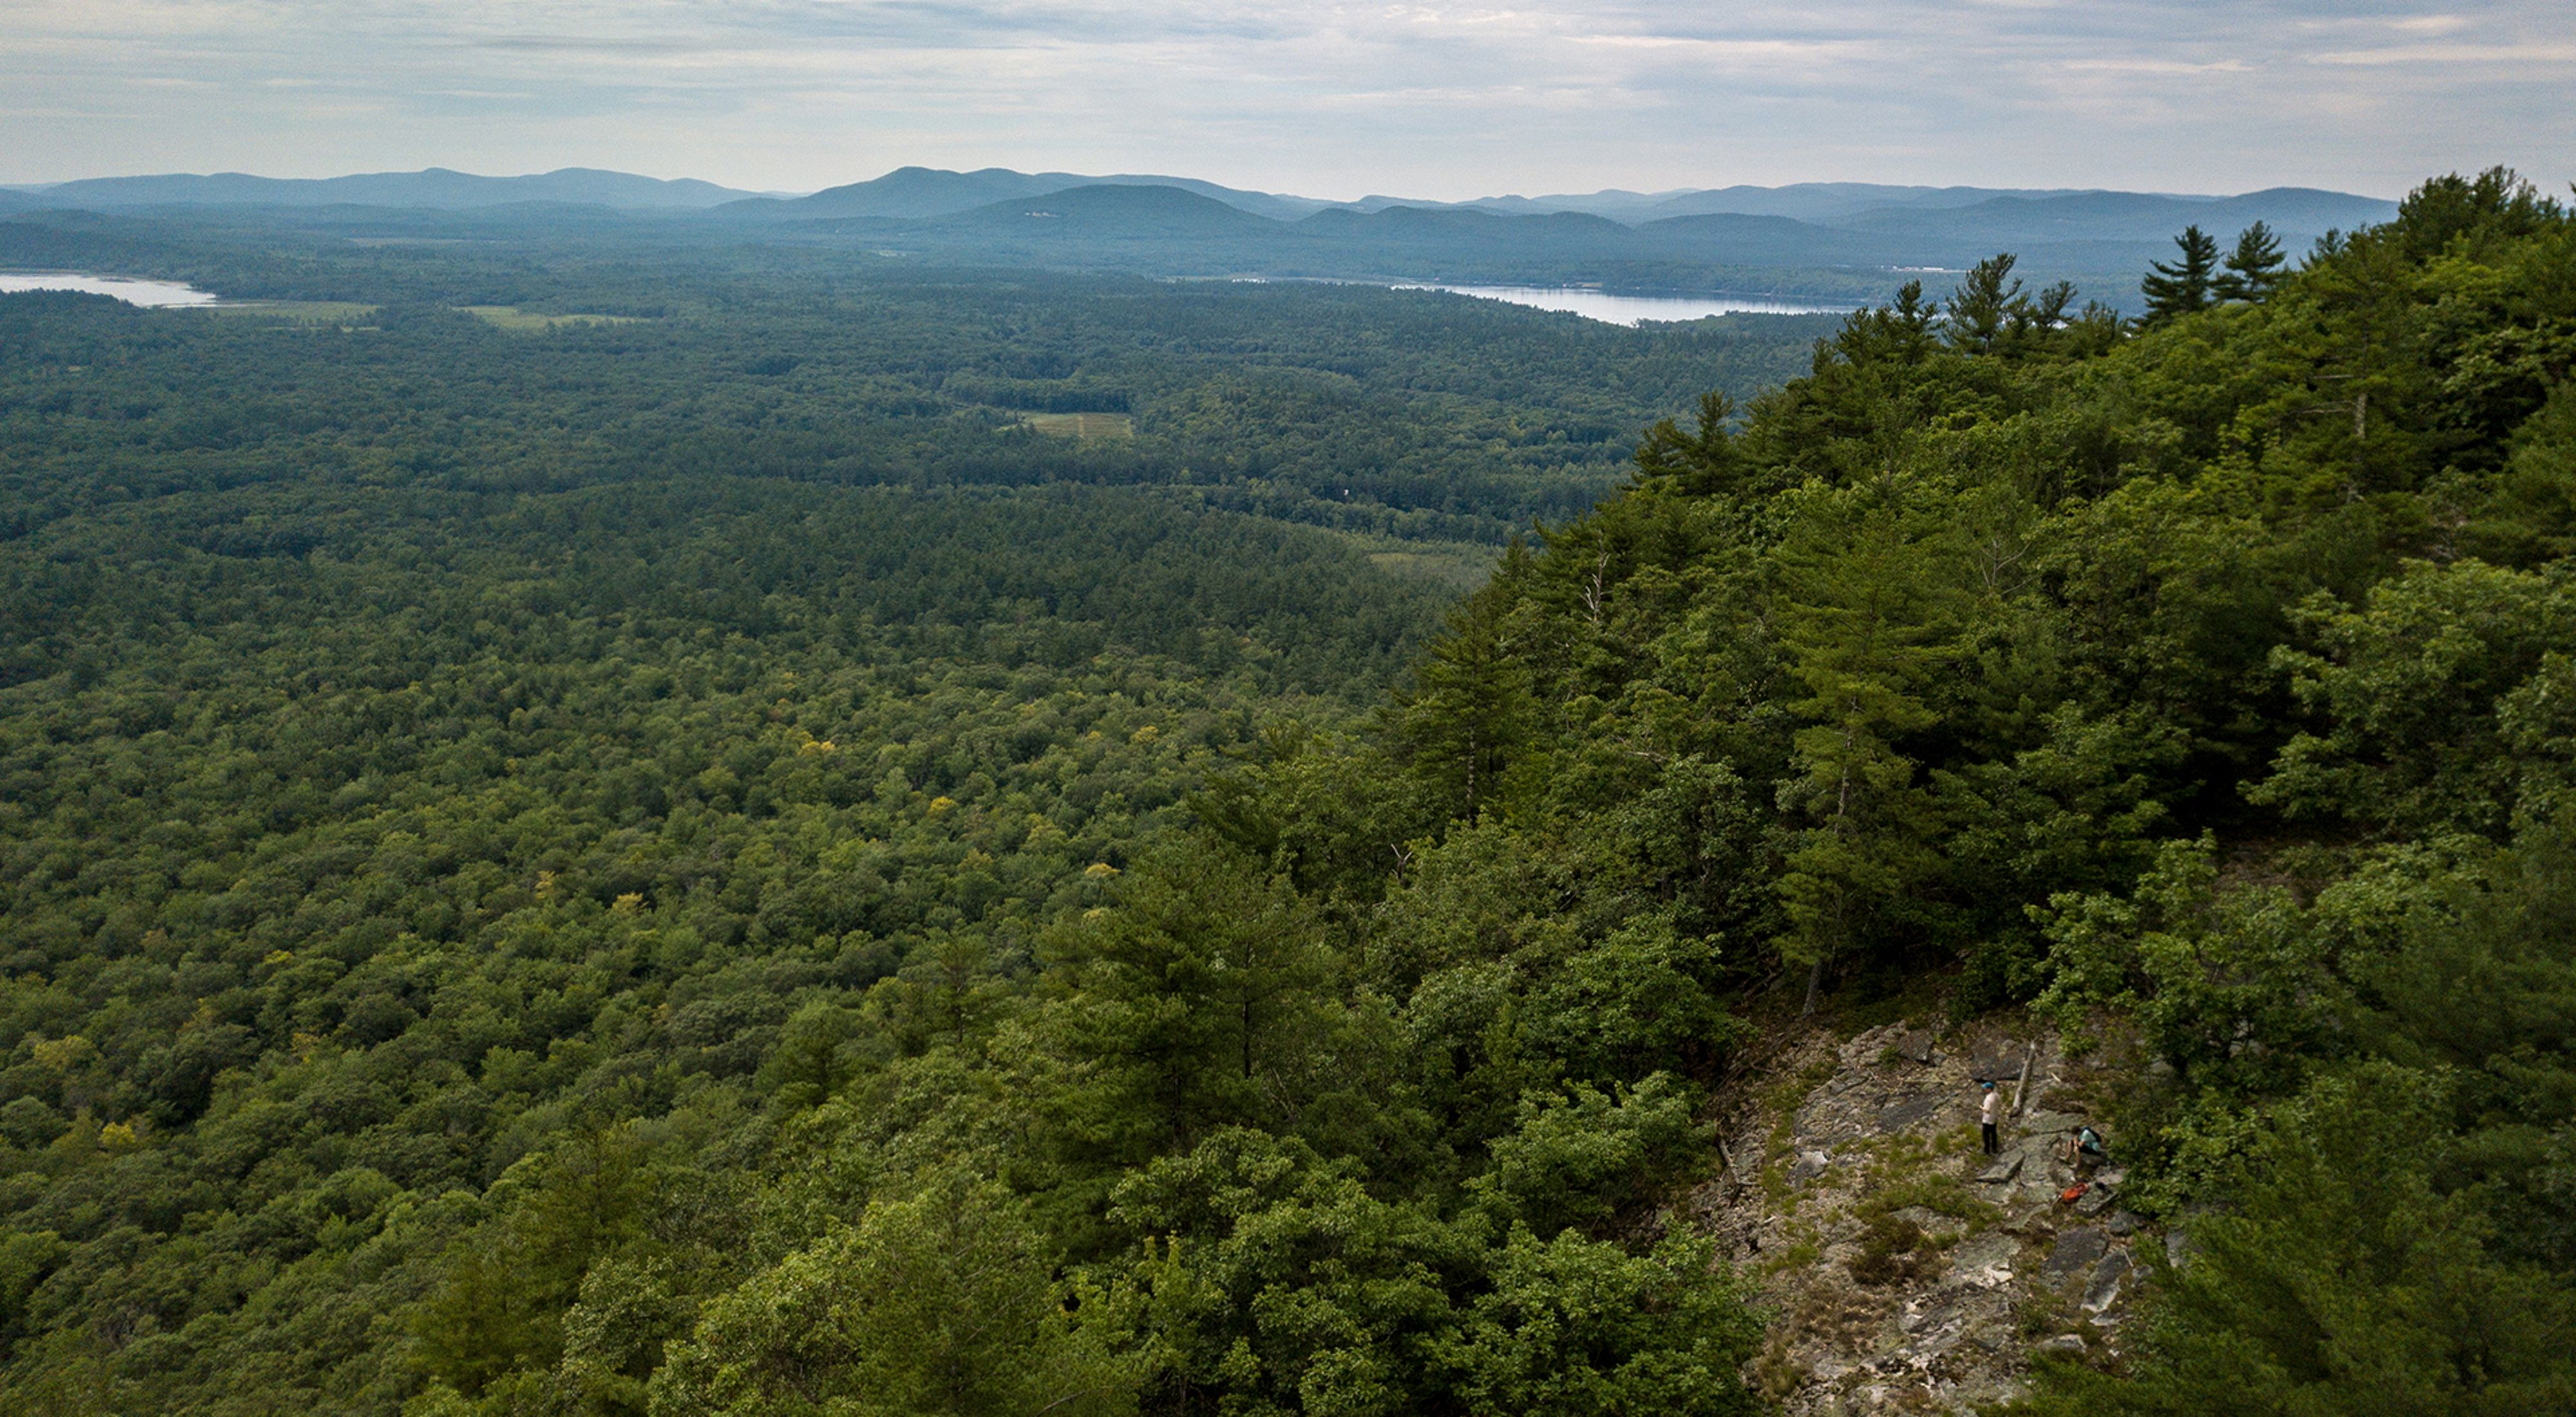 A view of a forested flood plain with lakes and distant mountains.